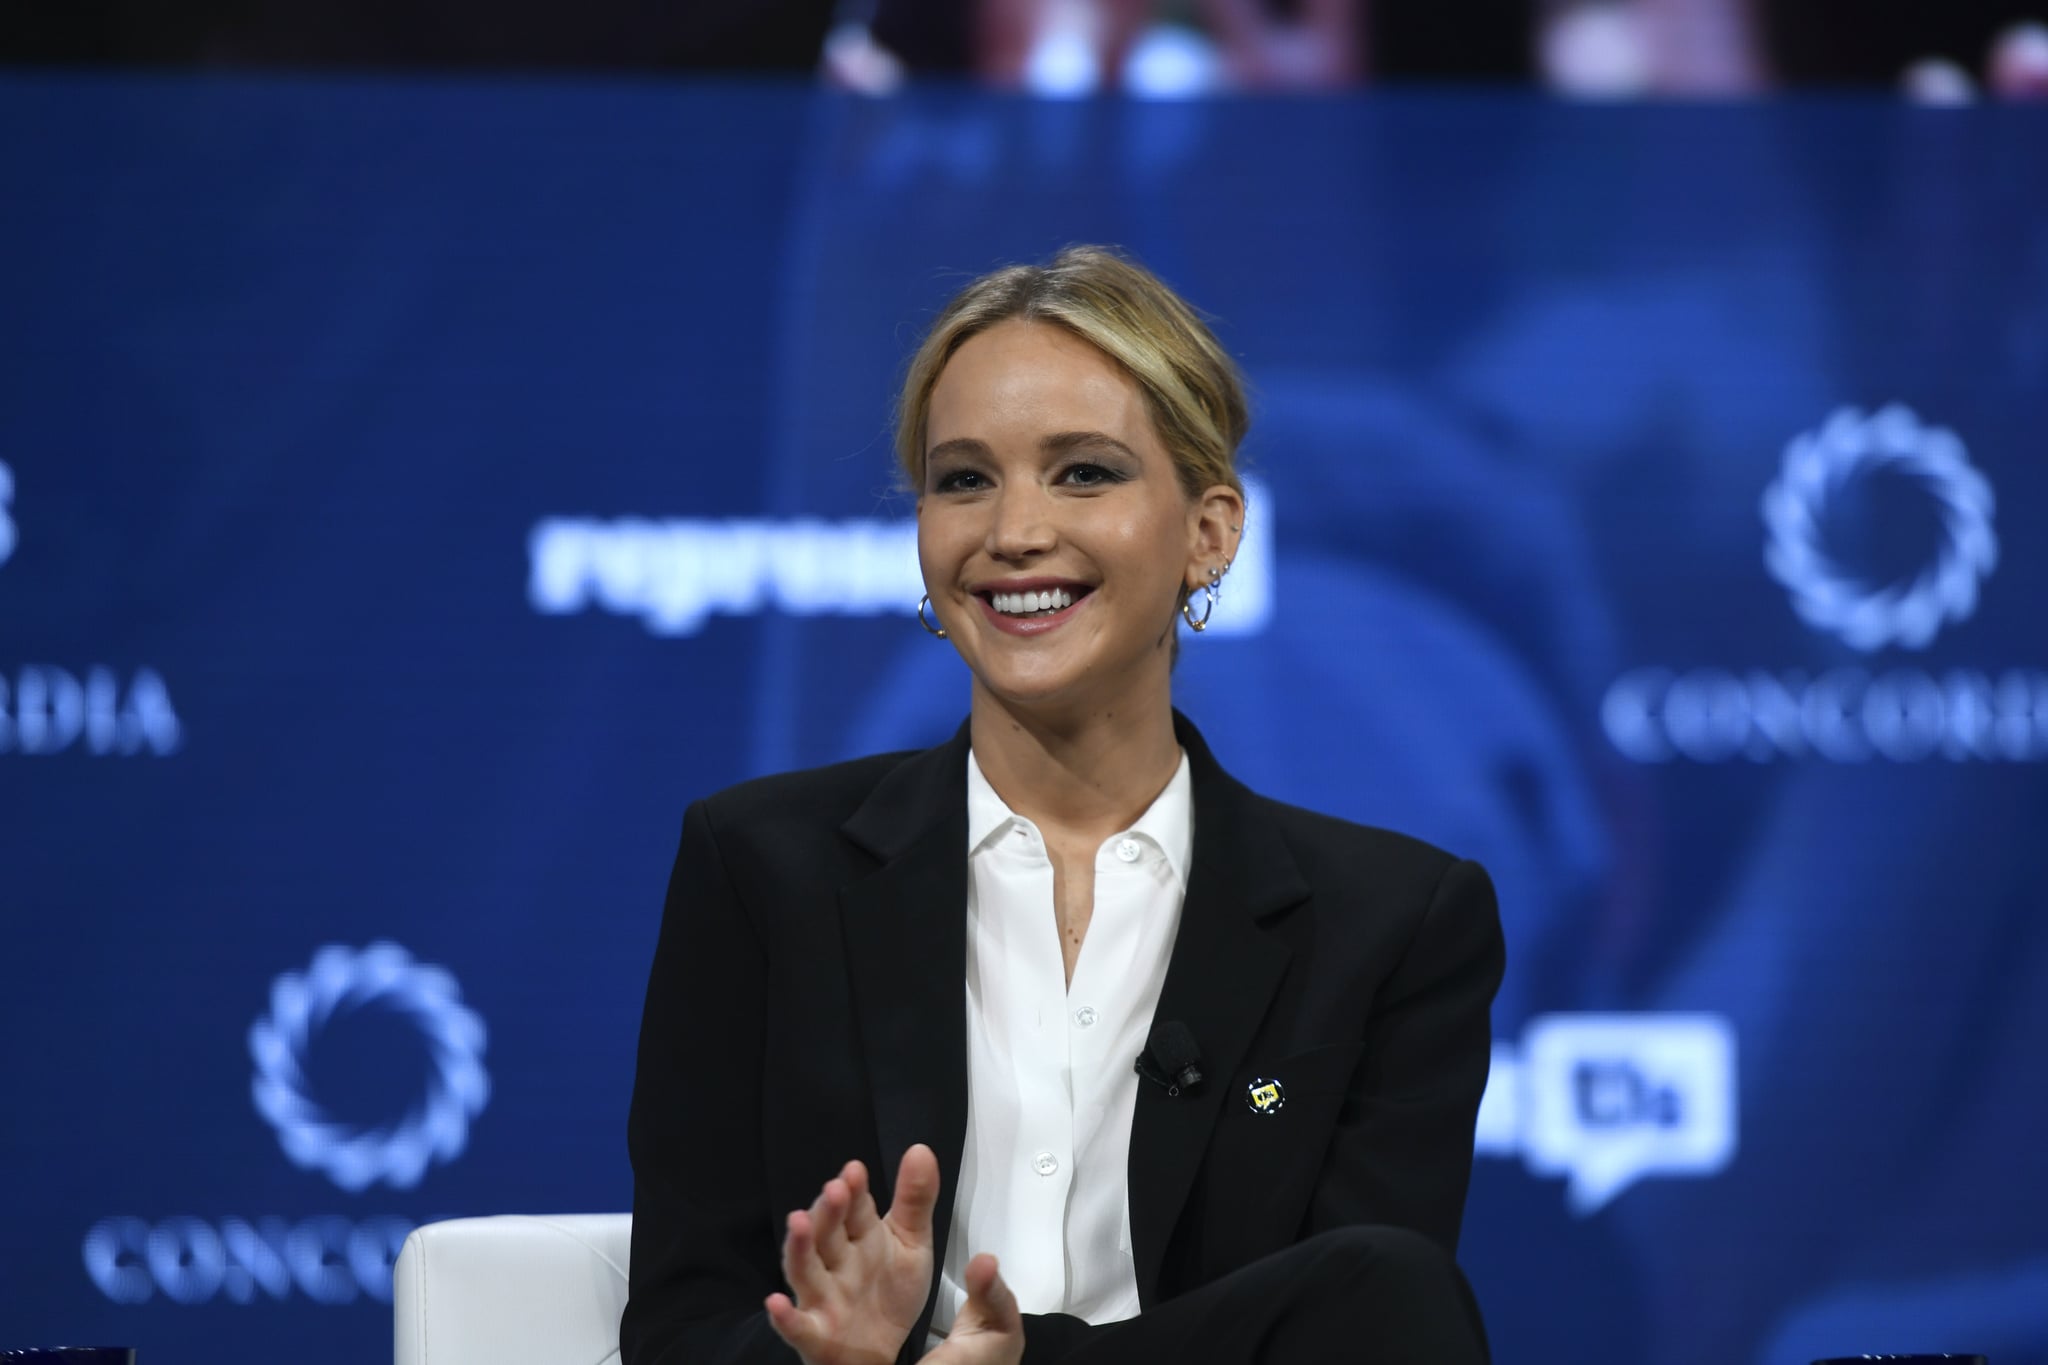 NEW YORK, NY - SEPTEMBER 25:  Actor and Board Member of RepresentUs Jennifer Lawrence speaks onstage during the 2018 Concordia Annual Summit - Day 2 at Grand Hyatt New York on September 25, 2018 in New York City.  (Photo by Riccardo Savi/Getty Images for Concordia Summit)